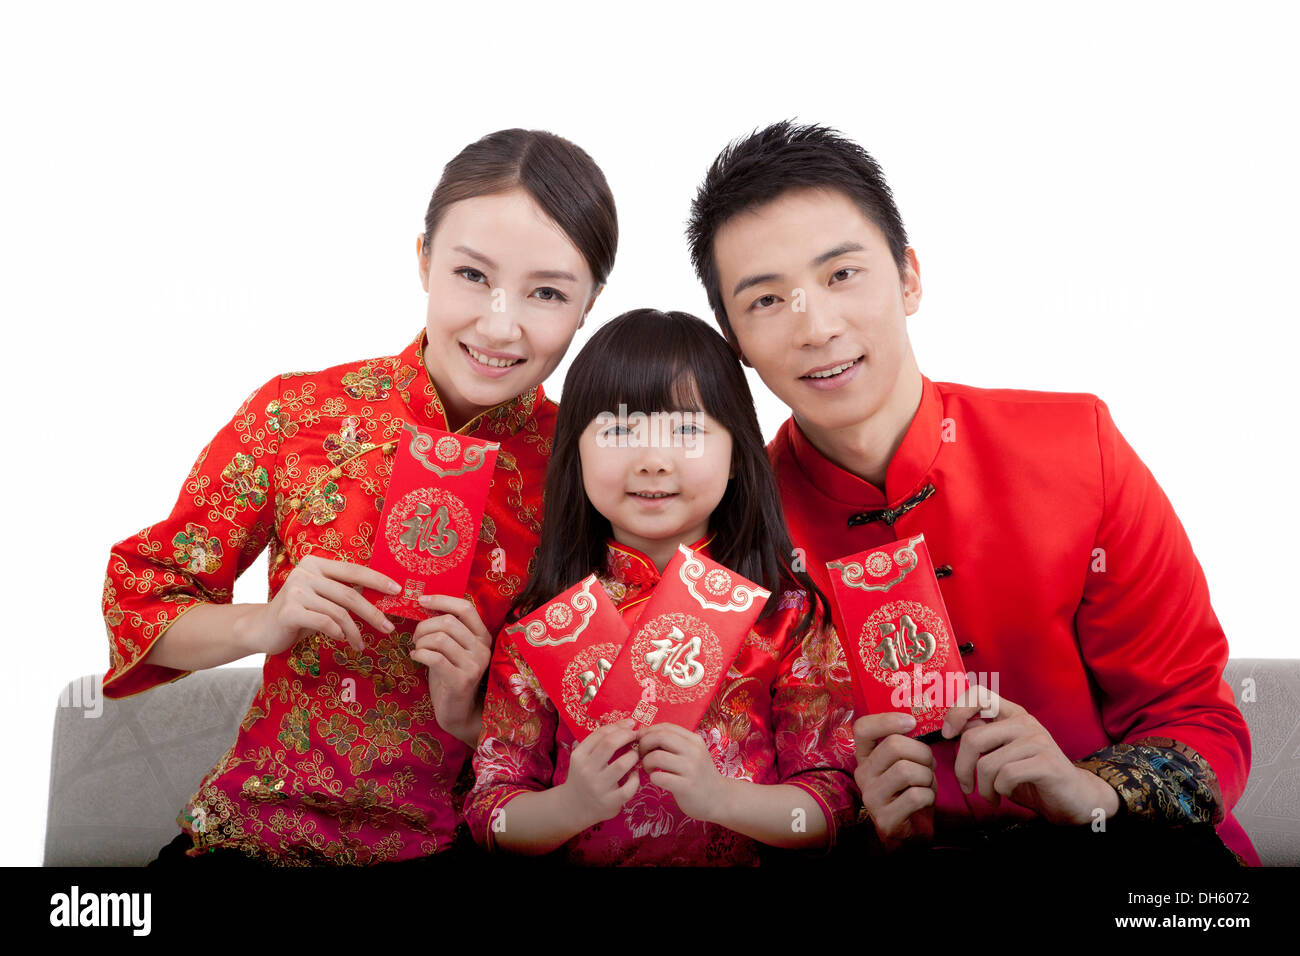 Family of three wearing costume and red envelope Stock Photo